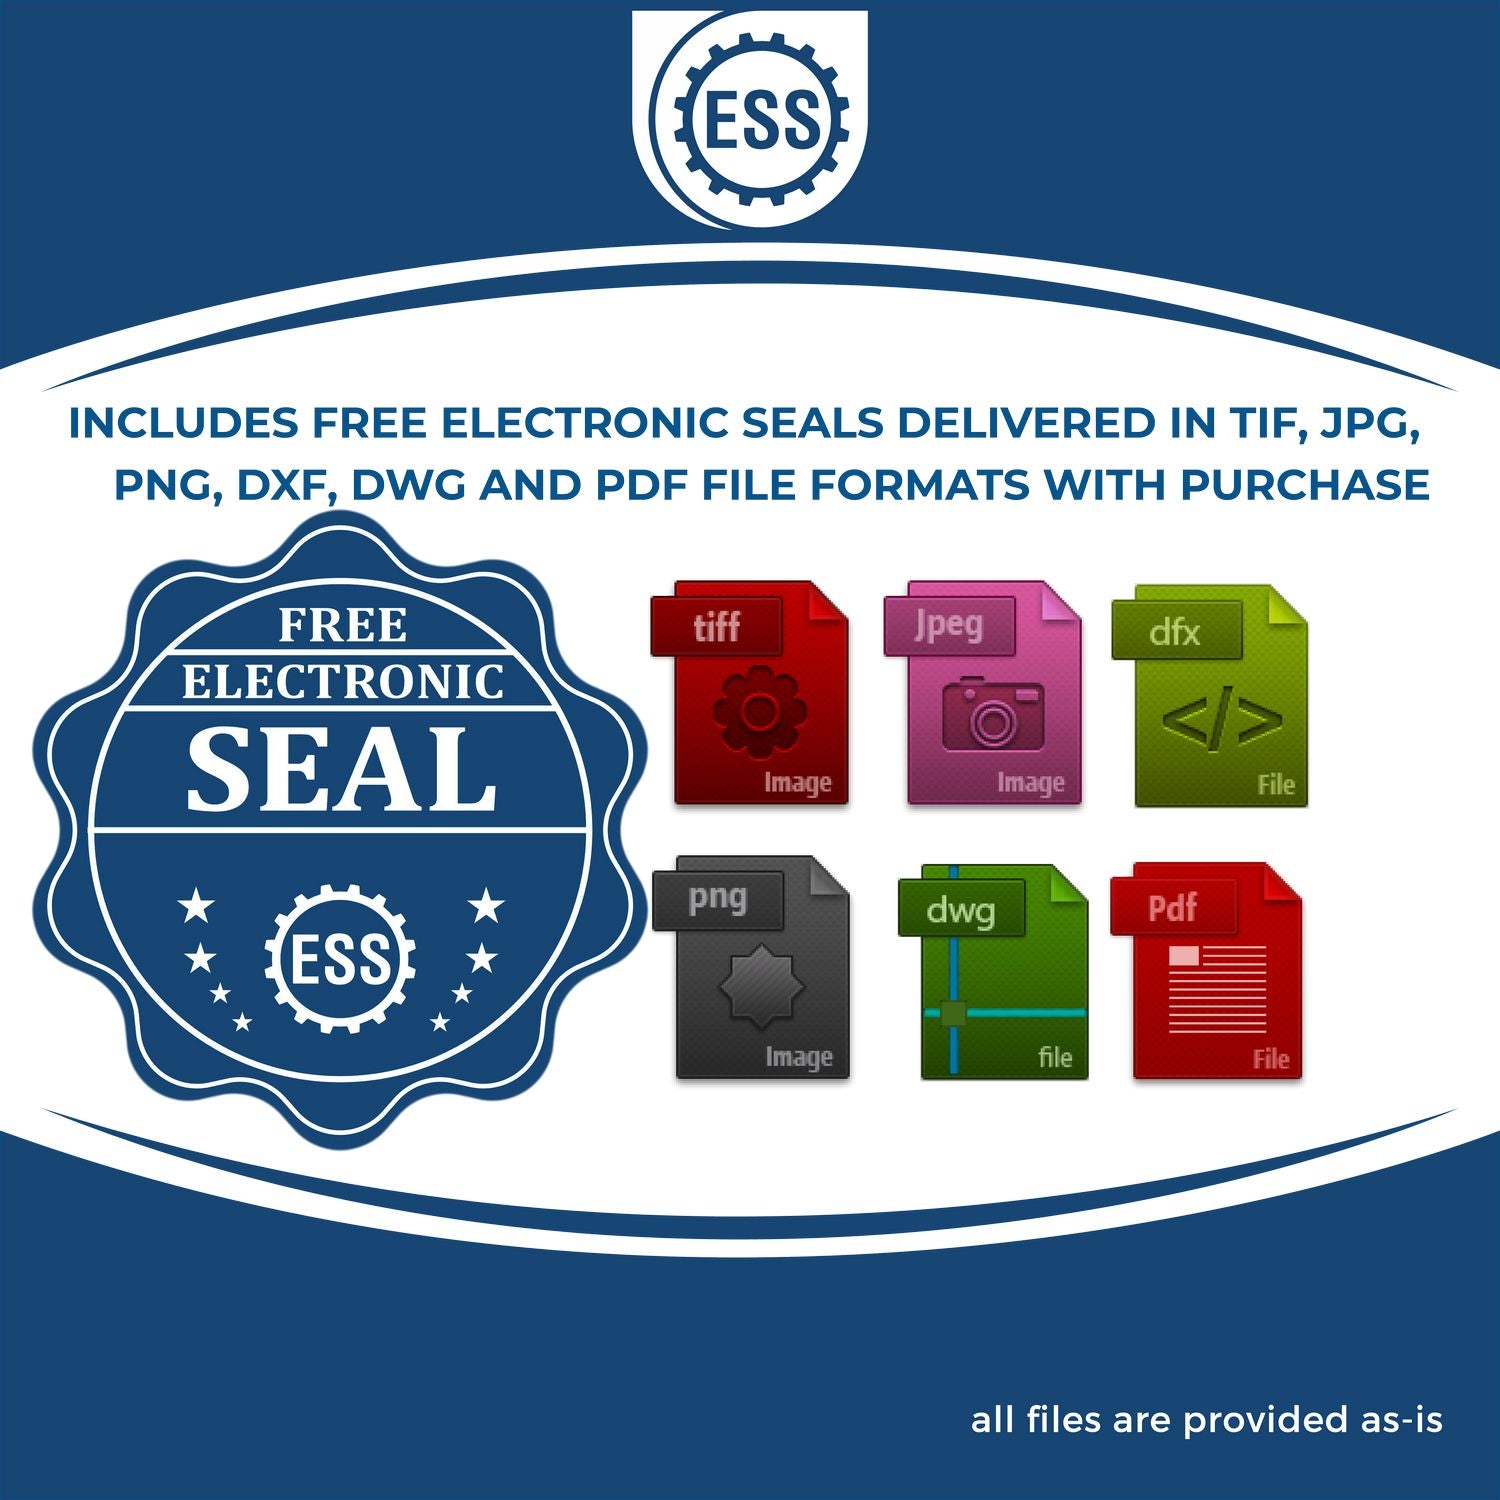 An infographic for the free electronic seal for the Long Reach Oregon PE Seal illustrating the different file type icons such as DXF, DWG, TIF, JPG and PNG.